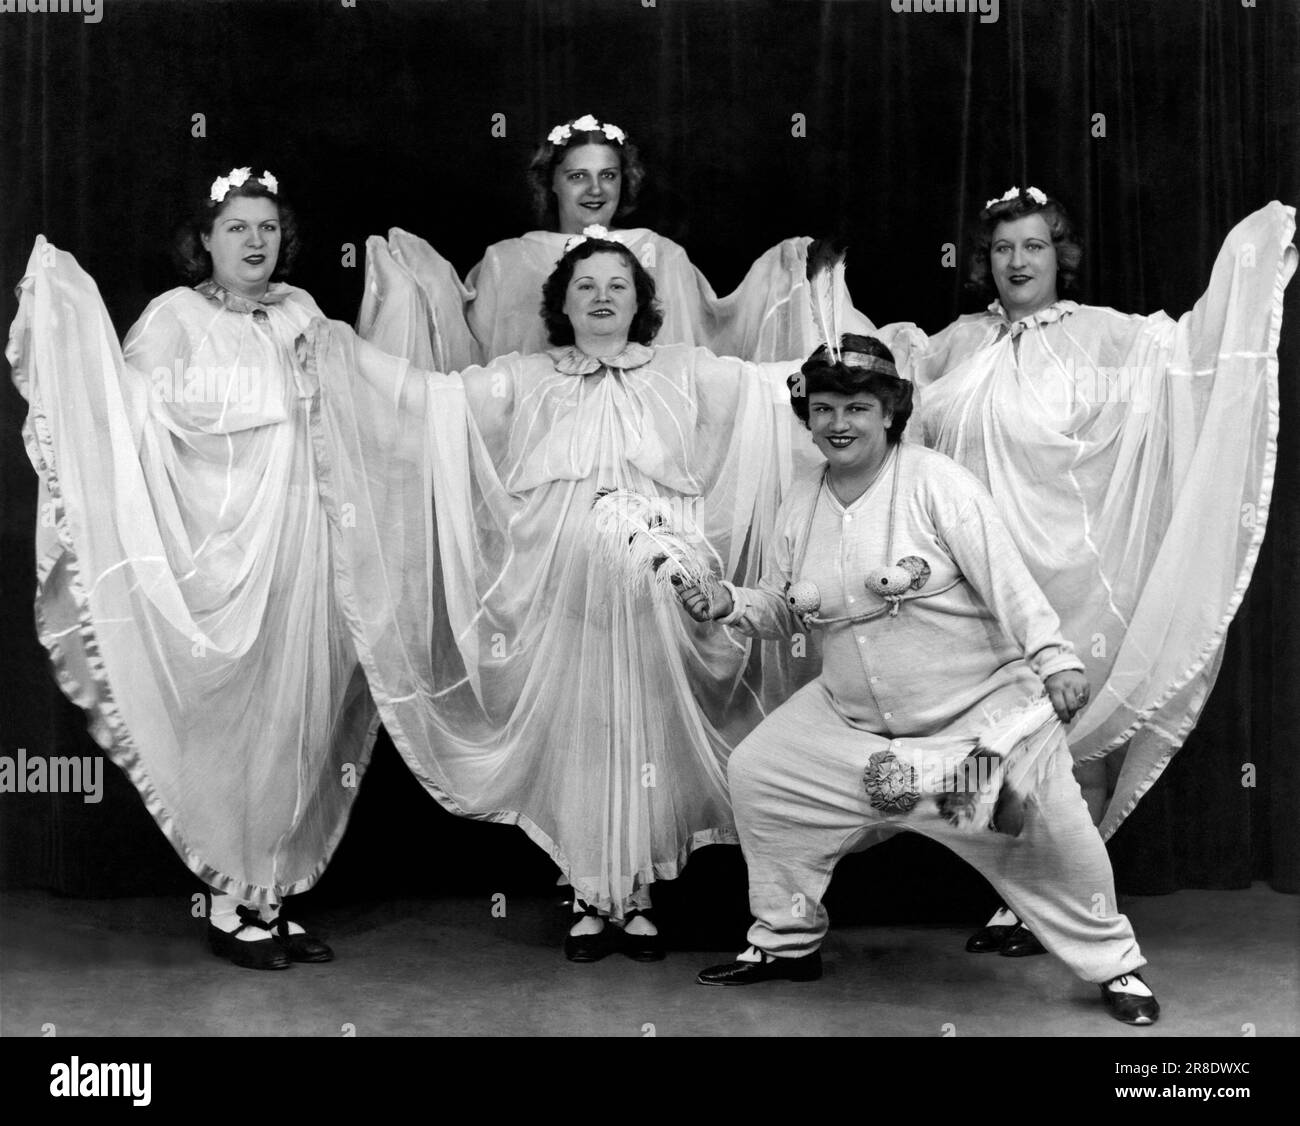 New York, New York:  c. 1930. A theatrical group performing in NY city. Stock Photo